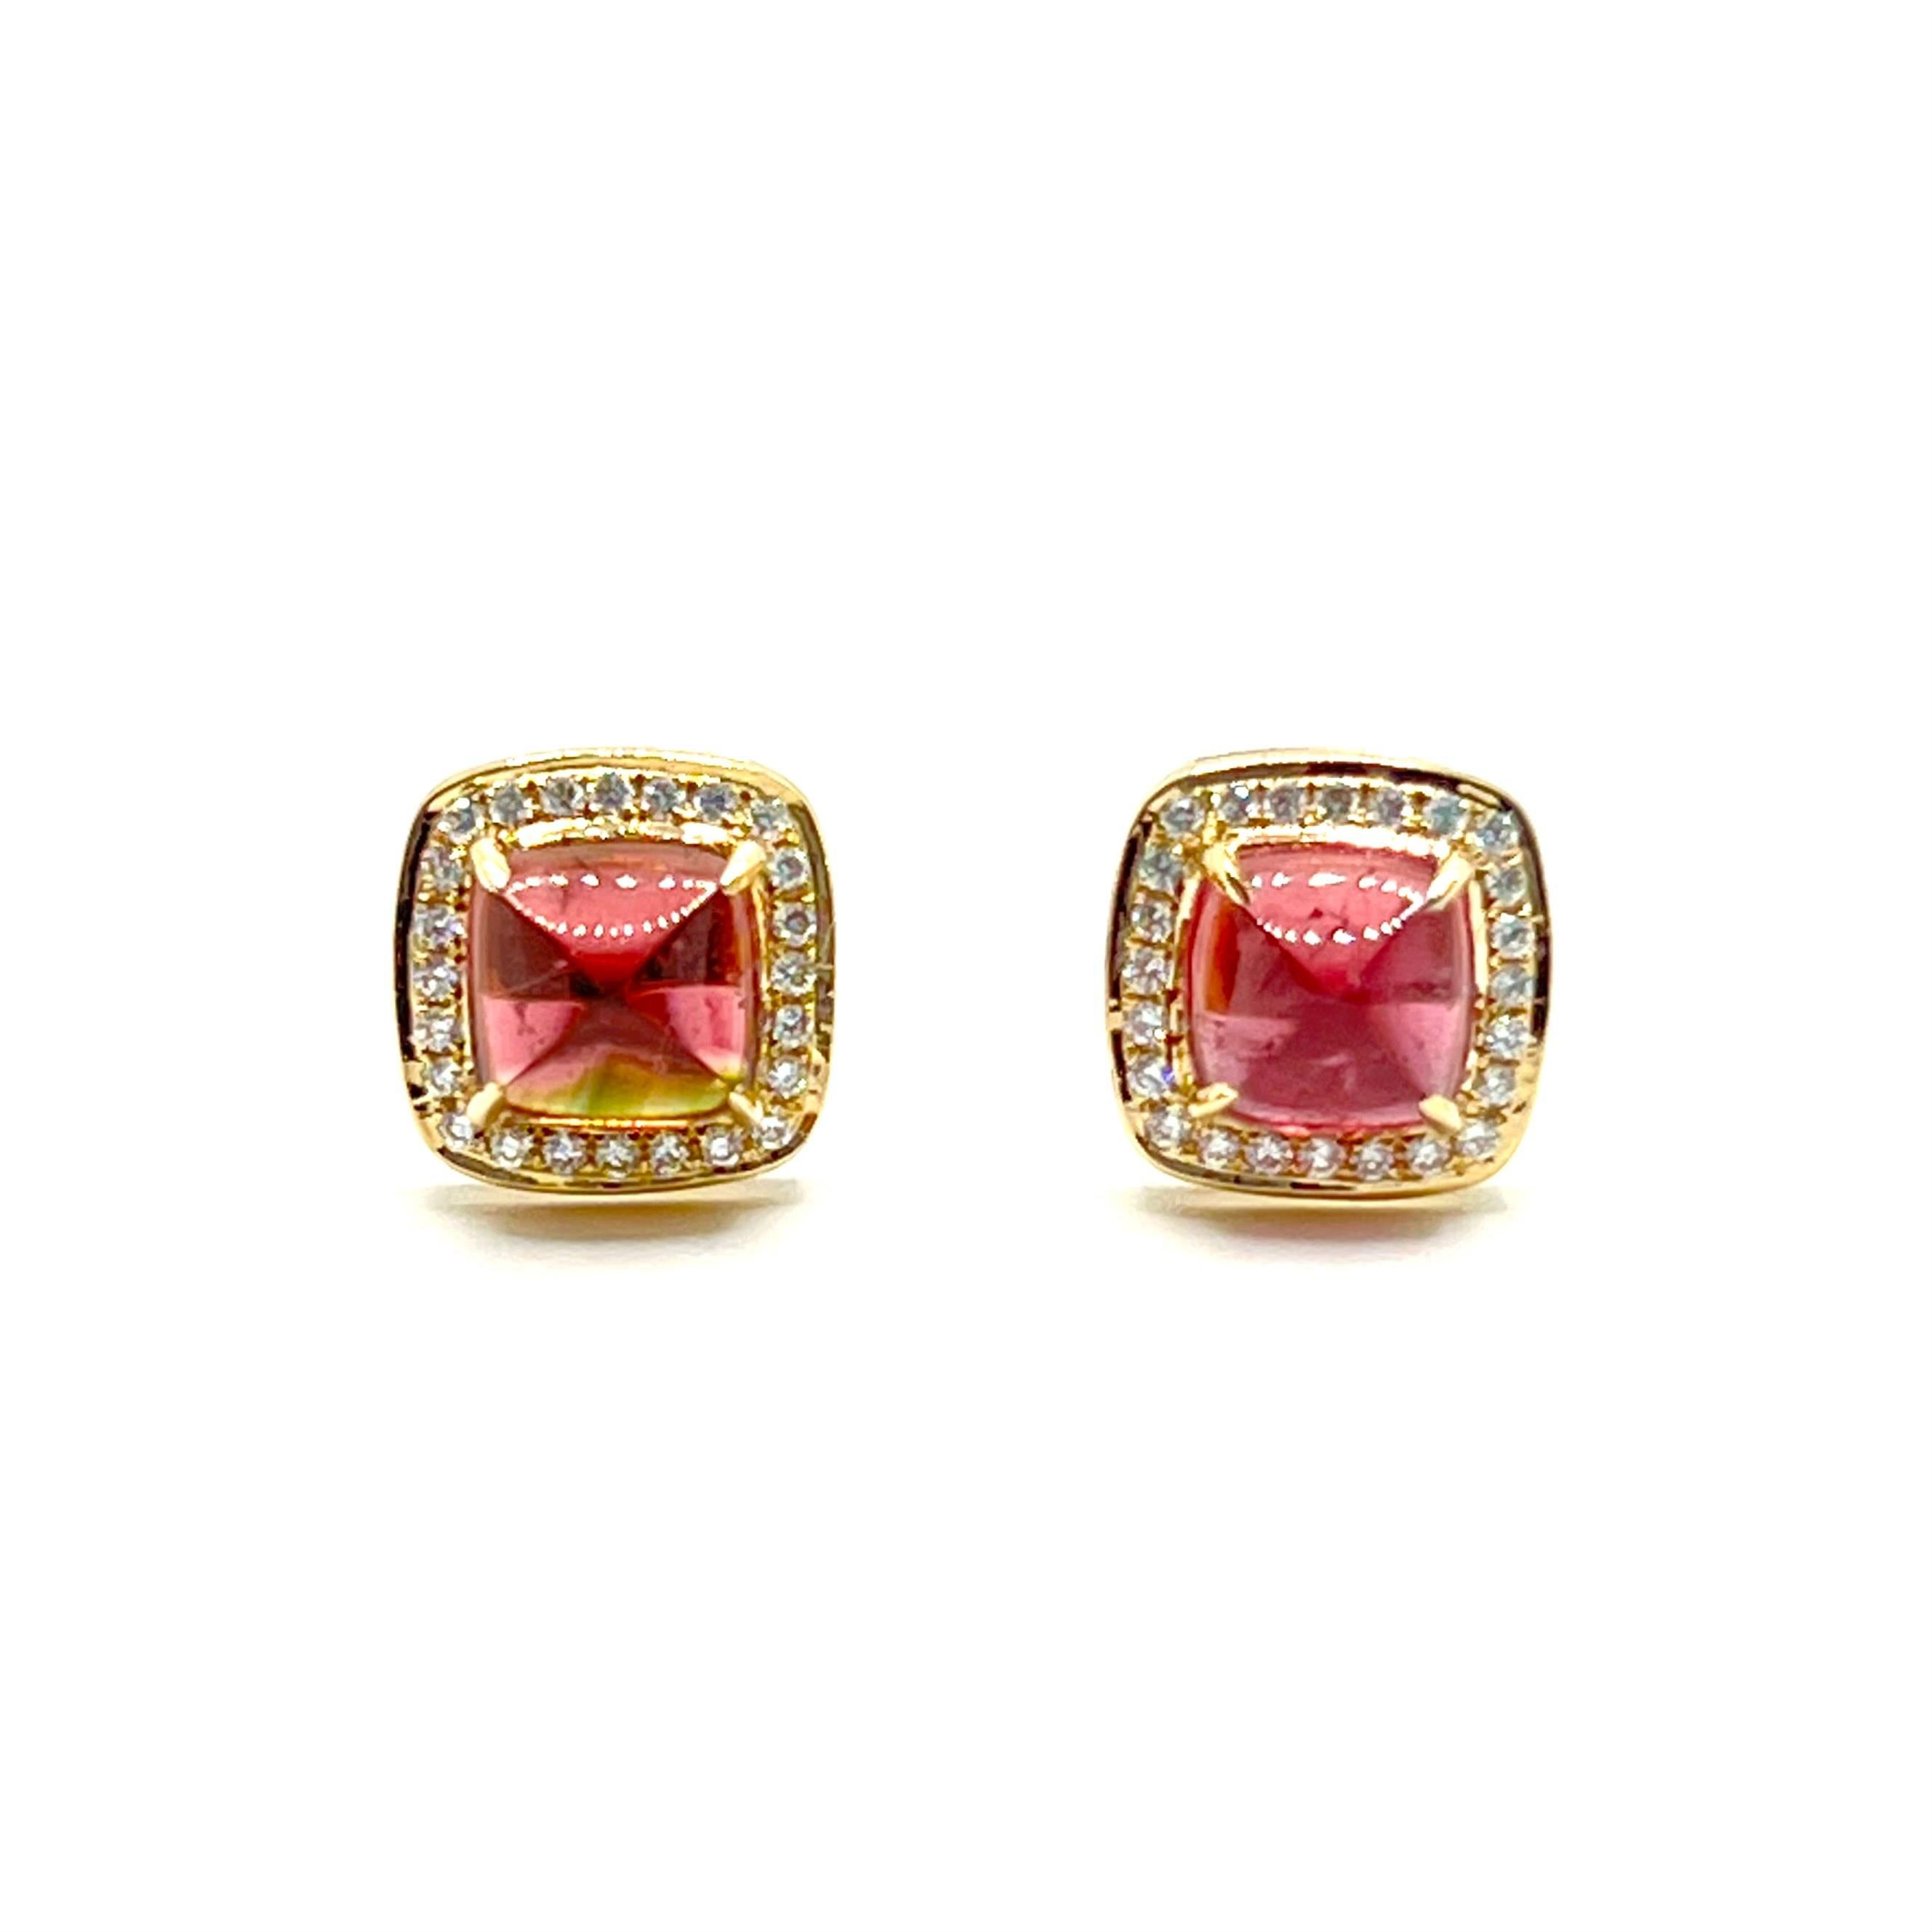 Stunning handcrafted sugarloaf pink tourmaline and diamond stud earrings.

Handcrafted from 14k yellow gold, the earrings features beautiful 2.76 carats sugarloaf cushion pink tourmaline and .22 carats of diamonds! Straight post with large friction